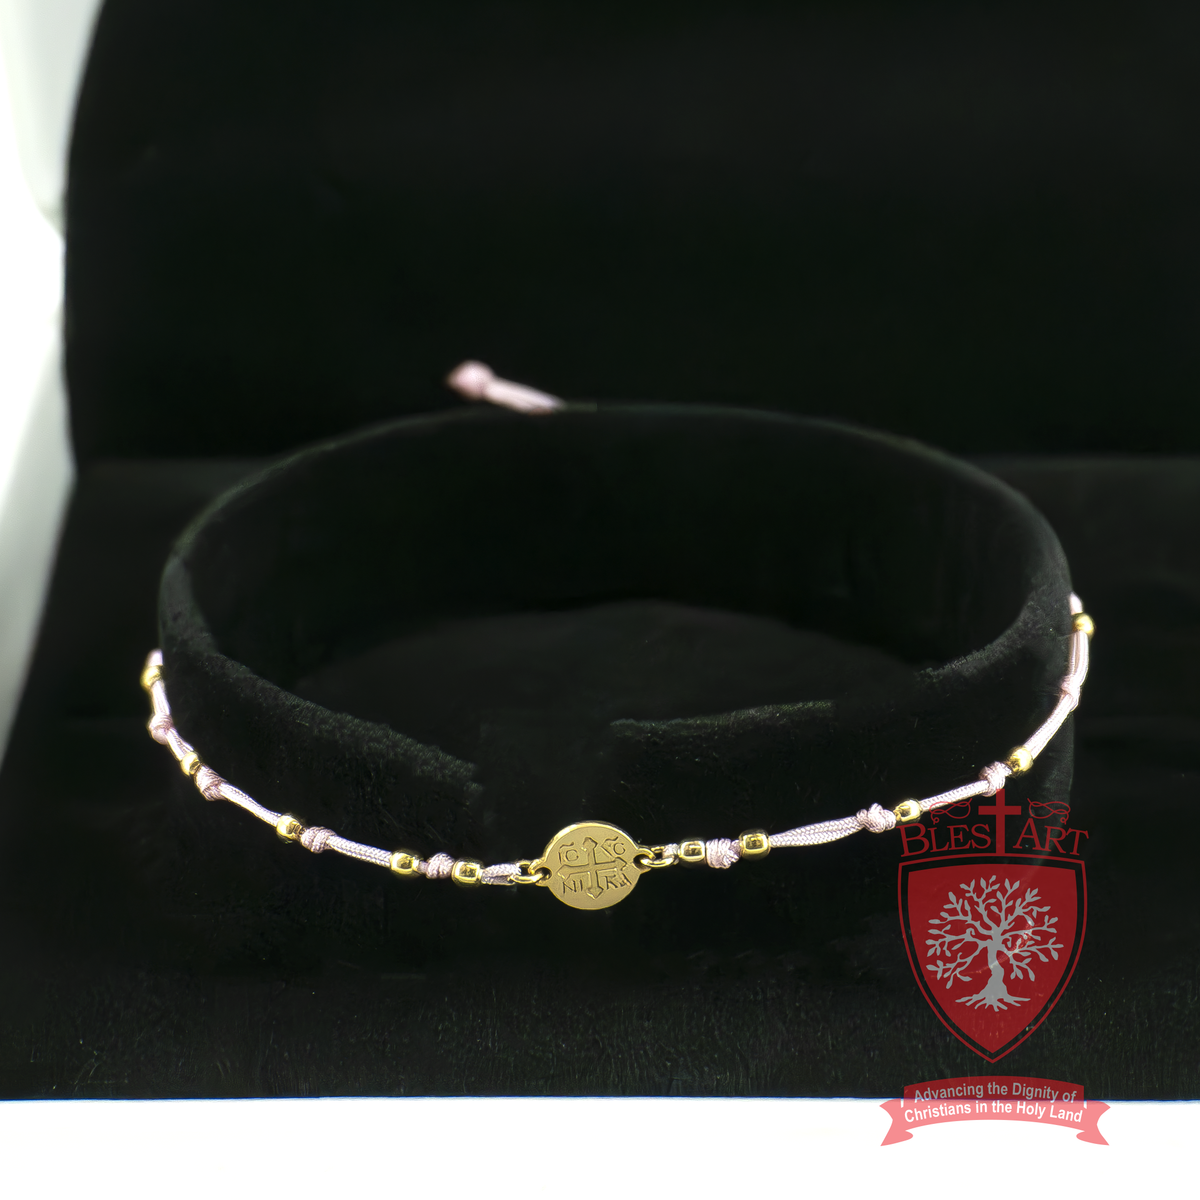 Seraphic Gold-Plated Cross Bracelet with White Beads